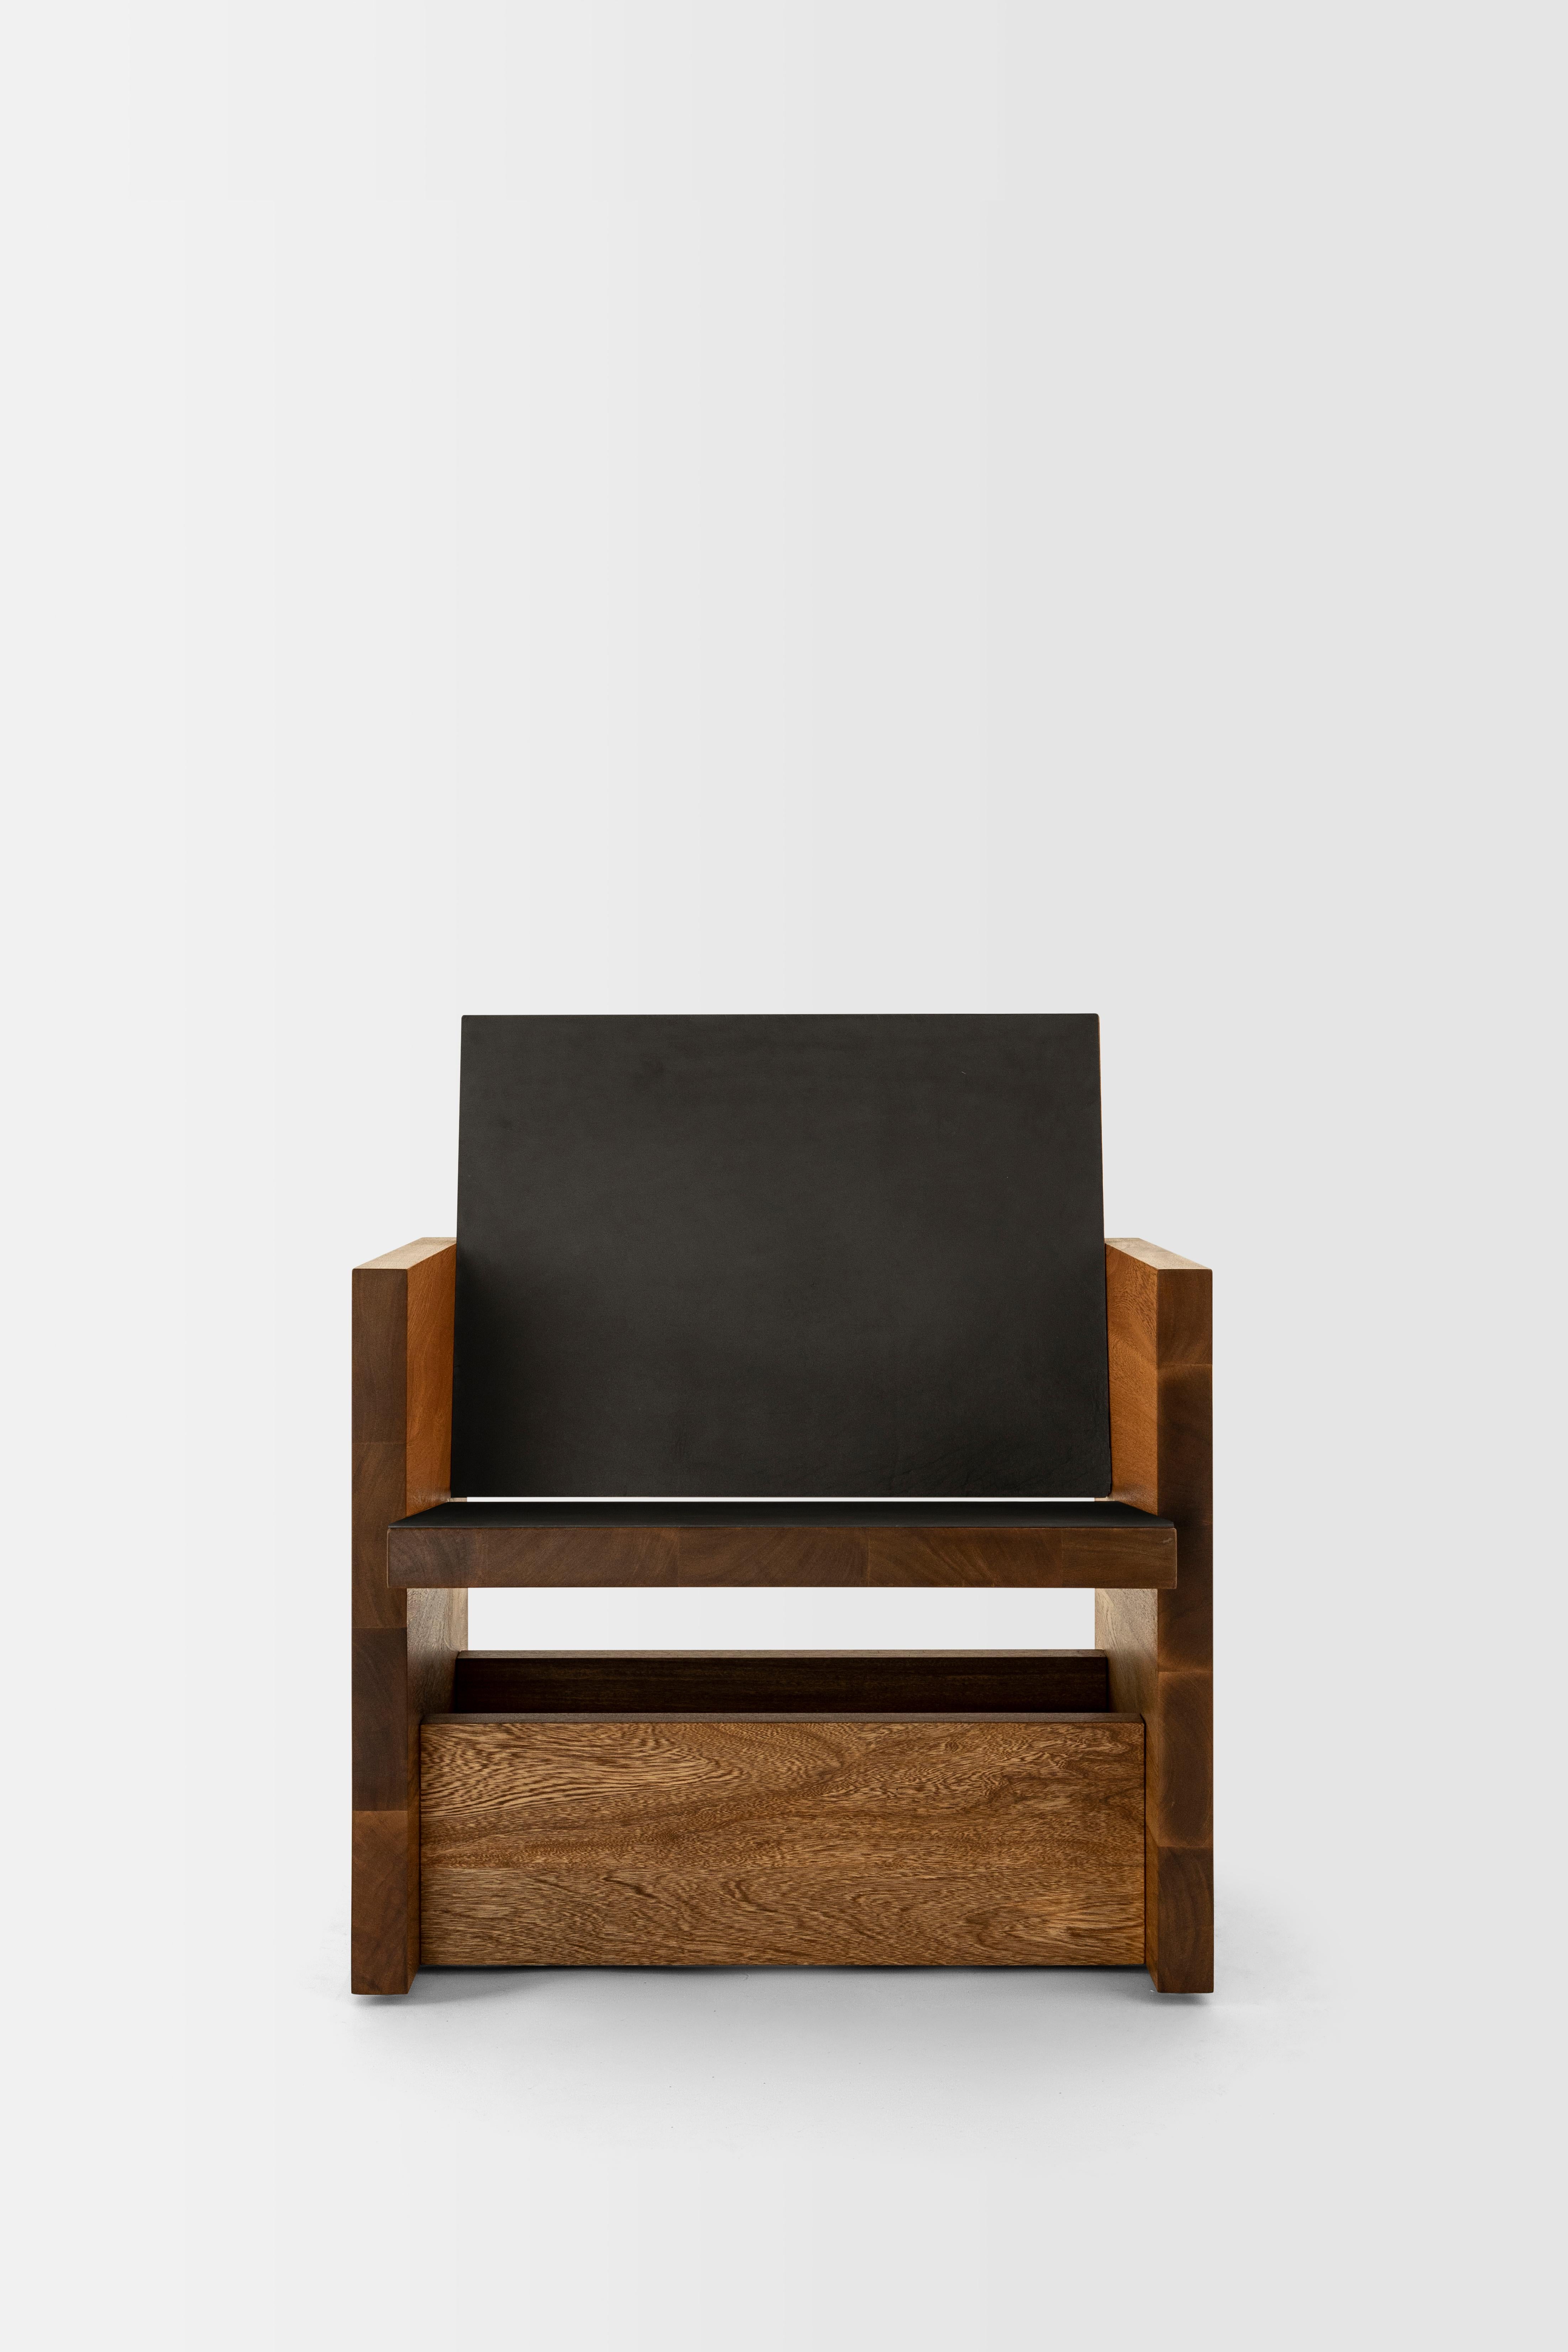 Simple lines and noble materials define Clavijero, a lounge chair and bench. Made by hand using traditional carpentry techniques, these two pieces are created for conversation, reading, rest, and contemplation.

Clavijero takes its name from one of